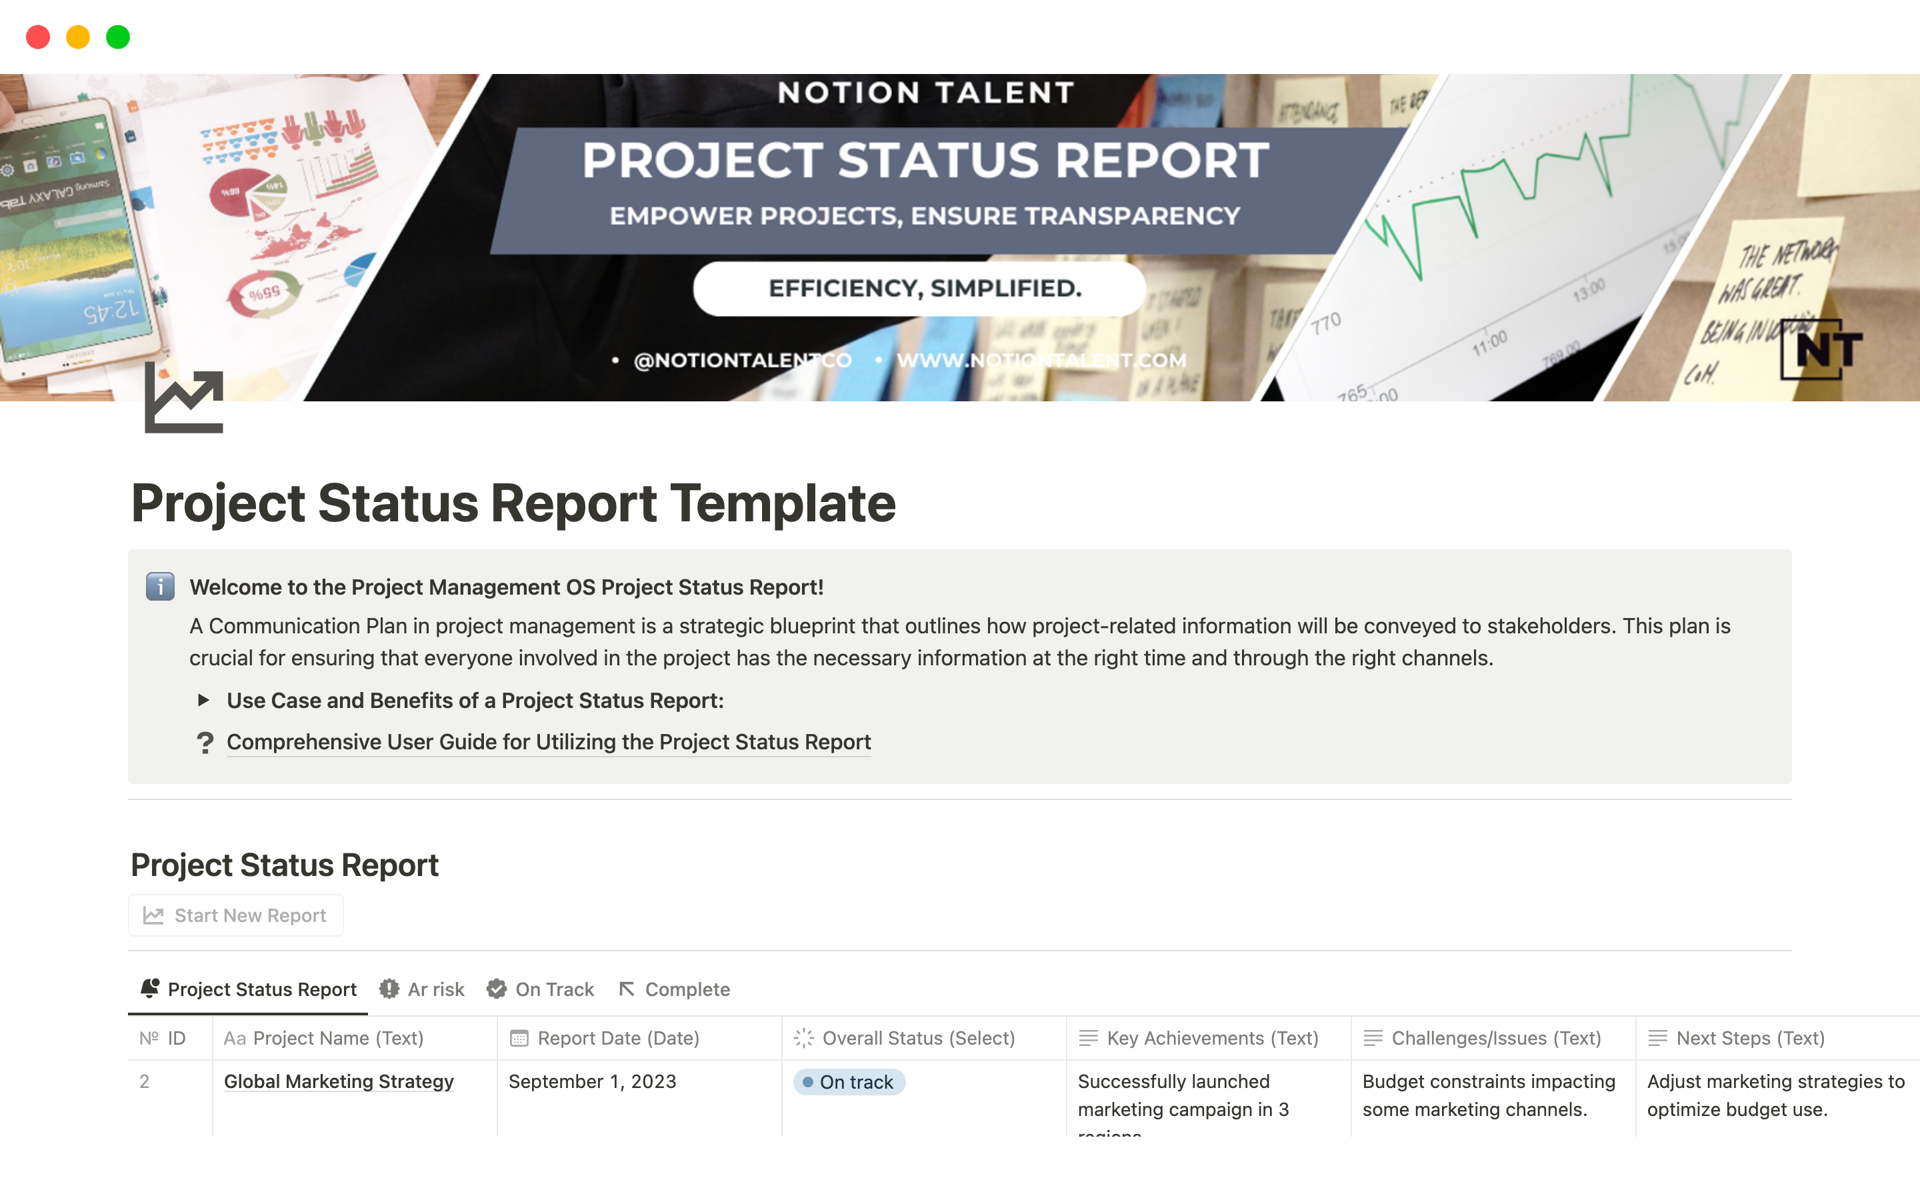 Stay on top of your project's progress with the Notion Project Status Report Template, providing a clear snapshot of ongoing activities and milestones. This template is an essential tool for maintaining transparency and accountability in project management.